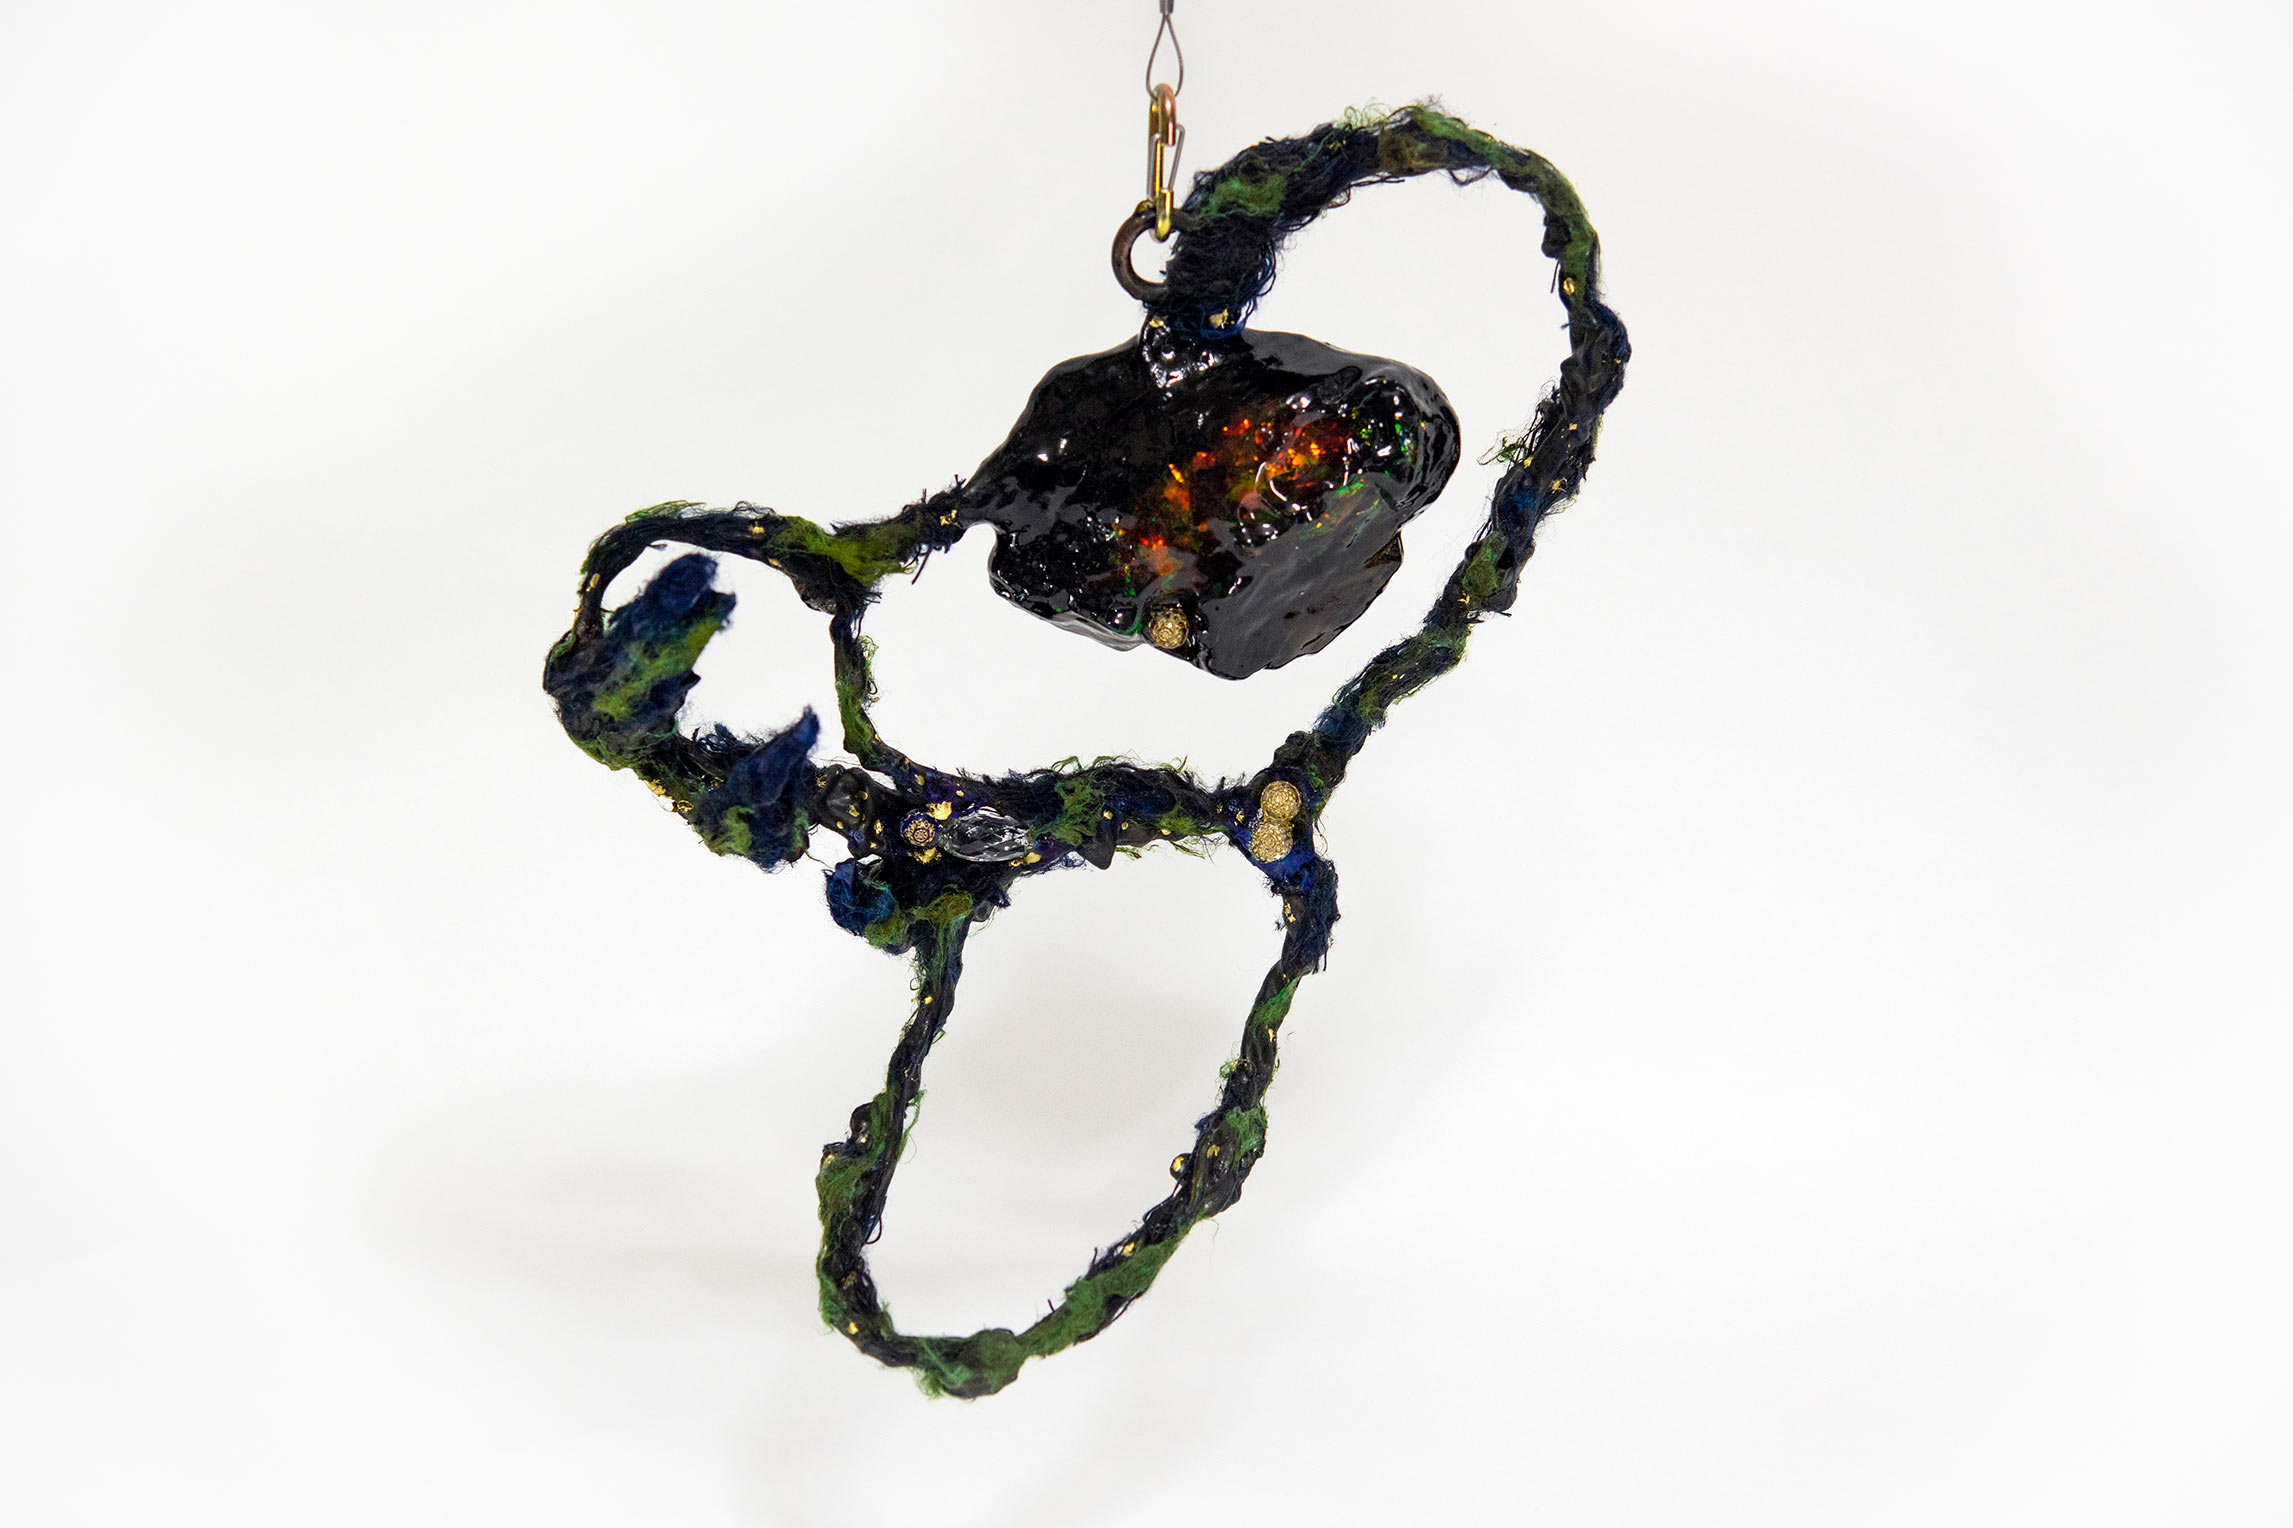 A crow in the rain [#SS21SC005] 2021, Oil, Resin, Glue, Yarn, Acrylic Beads, and Steel Wire on Stone Powder Clay and Resin Clay, 12 x 10.6 x 4.3 in. / 30 x 27 x 11 cm